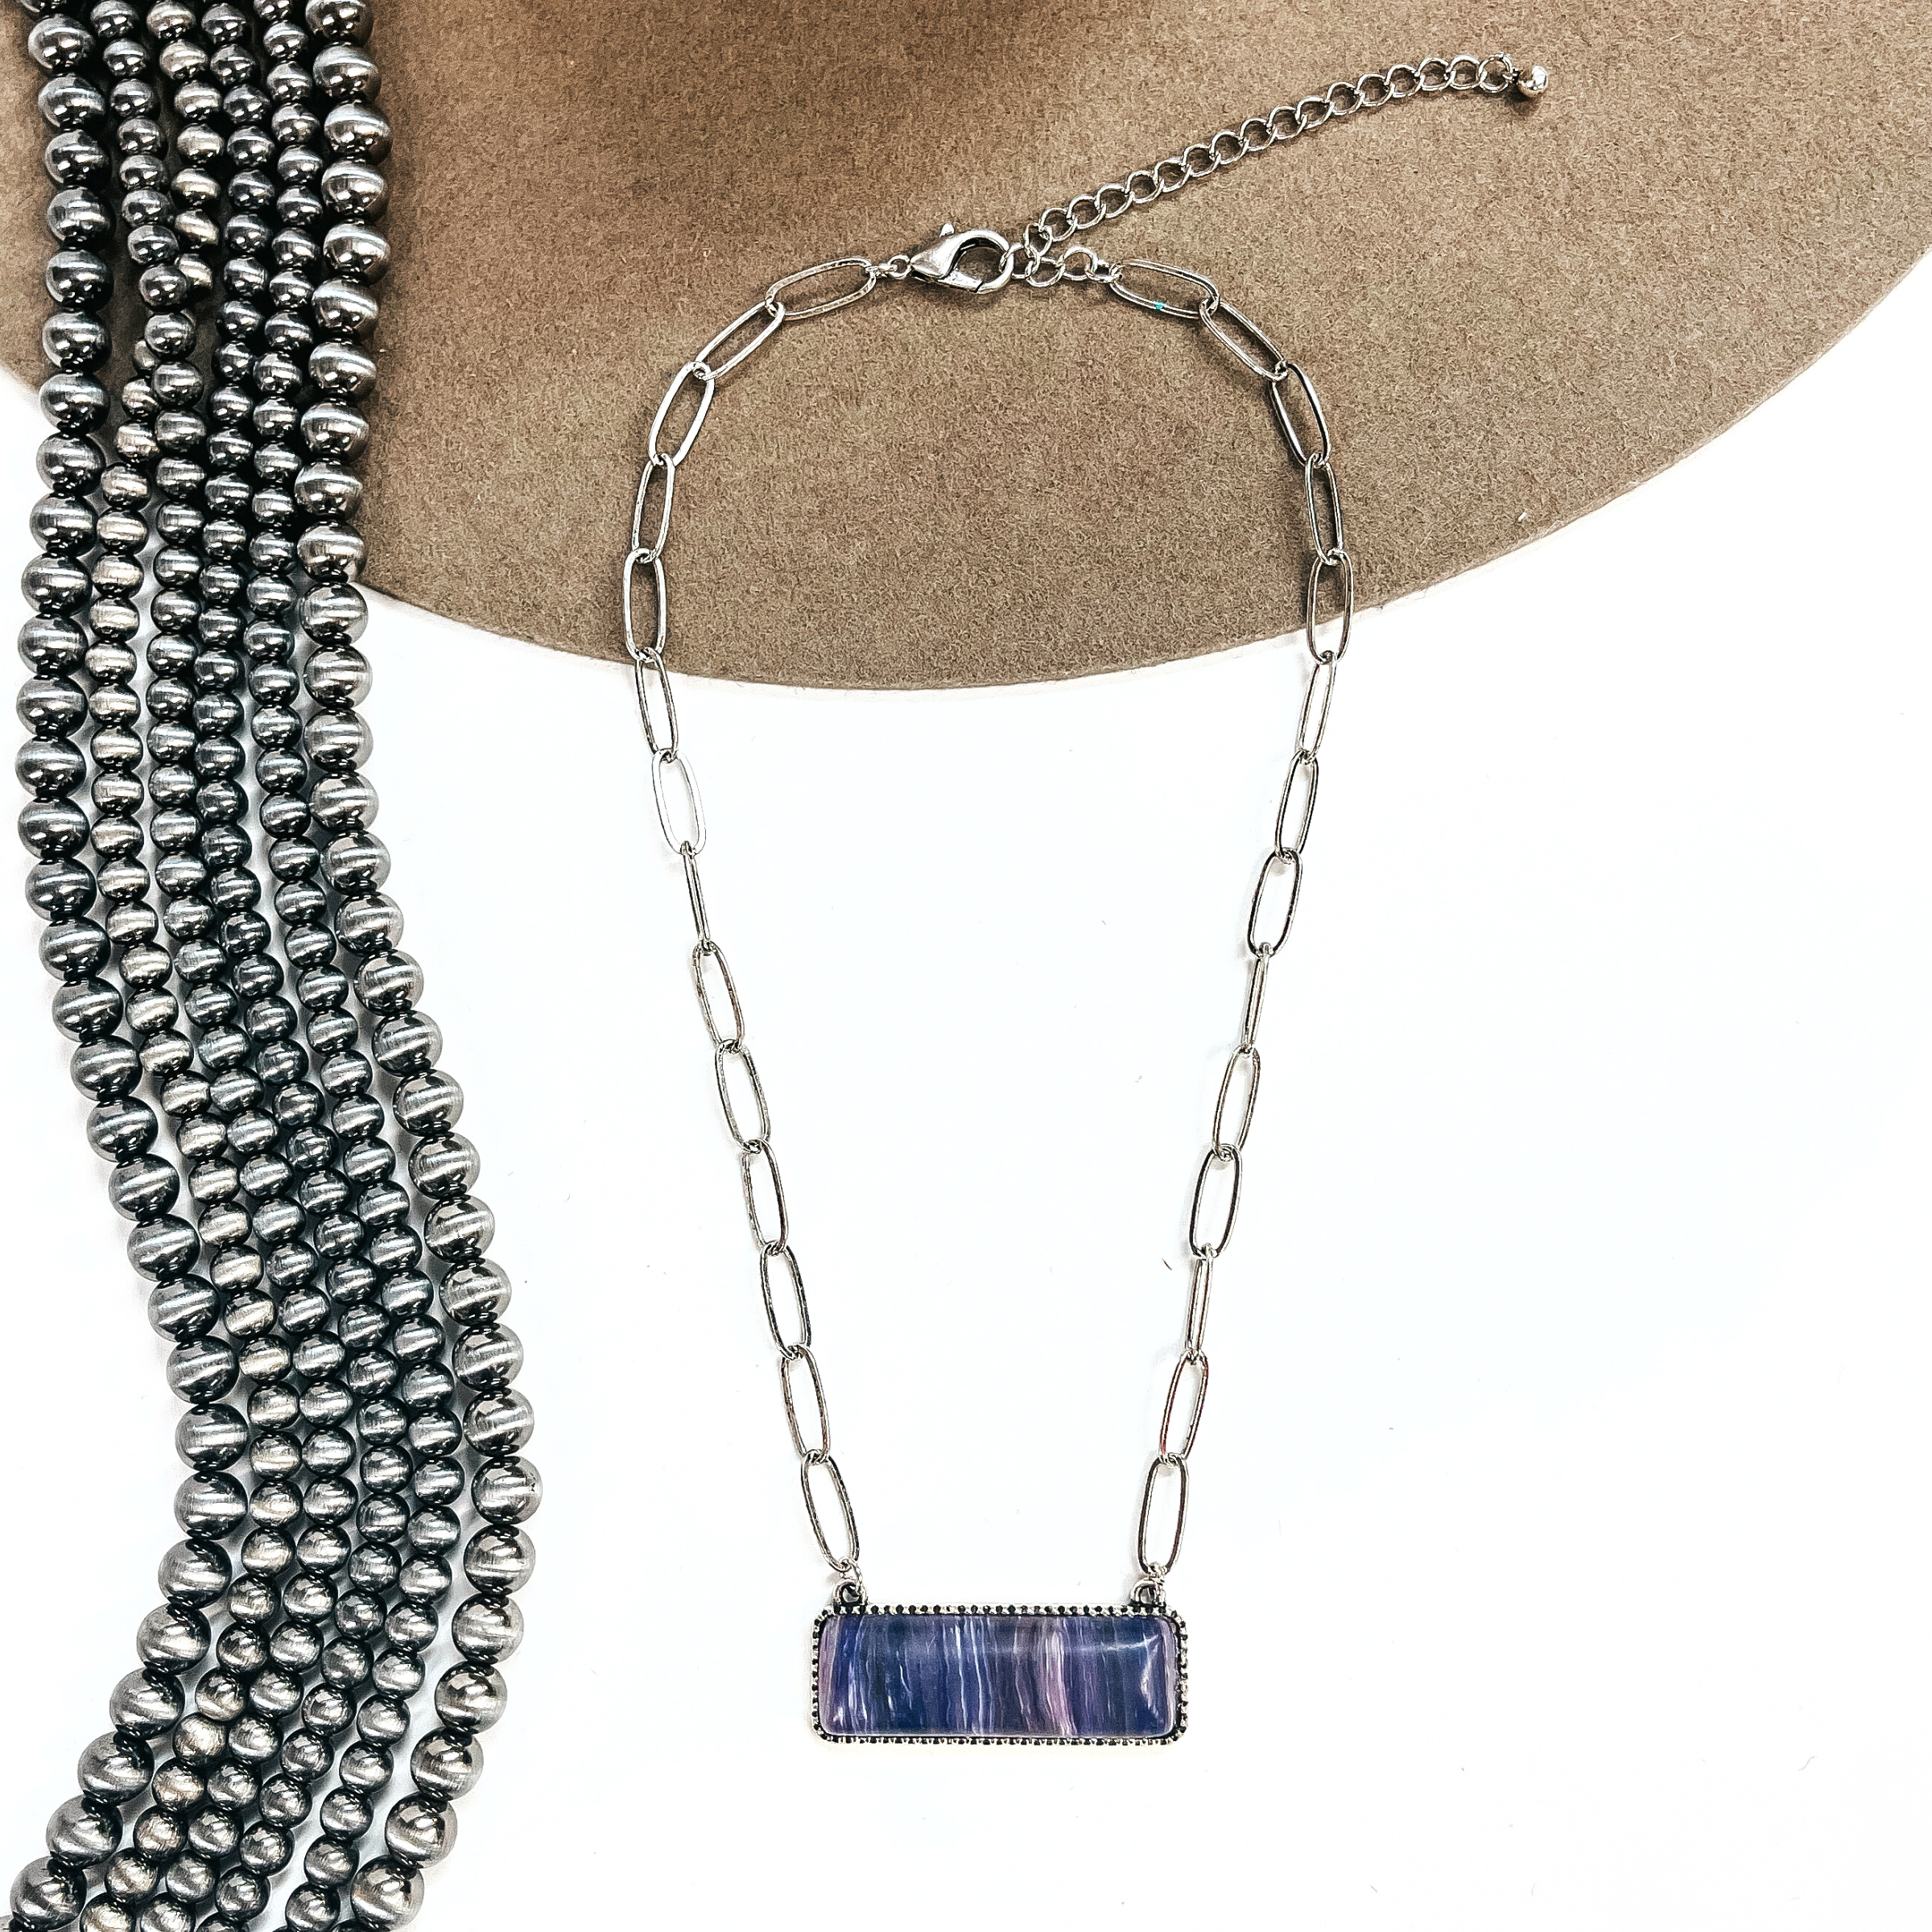 This is a silver tone thin link chain with a rectangle bar pendant in the center. The  rectangle bar pendant has an agate stone in purple. This necklace is laying on a white  background and light brown felt hat brim, with silver Navajo beads in the side as decor.